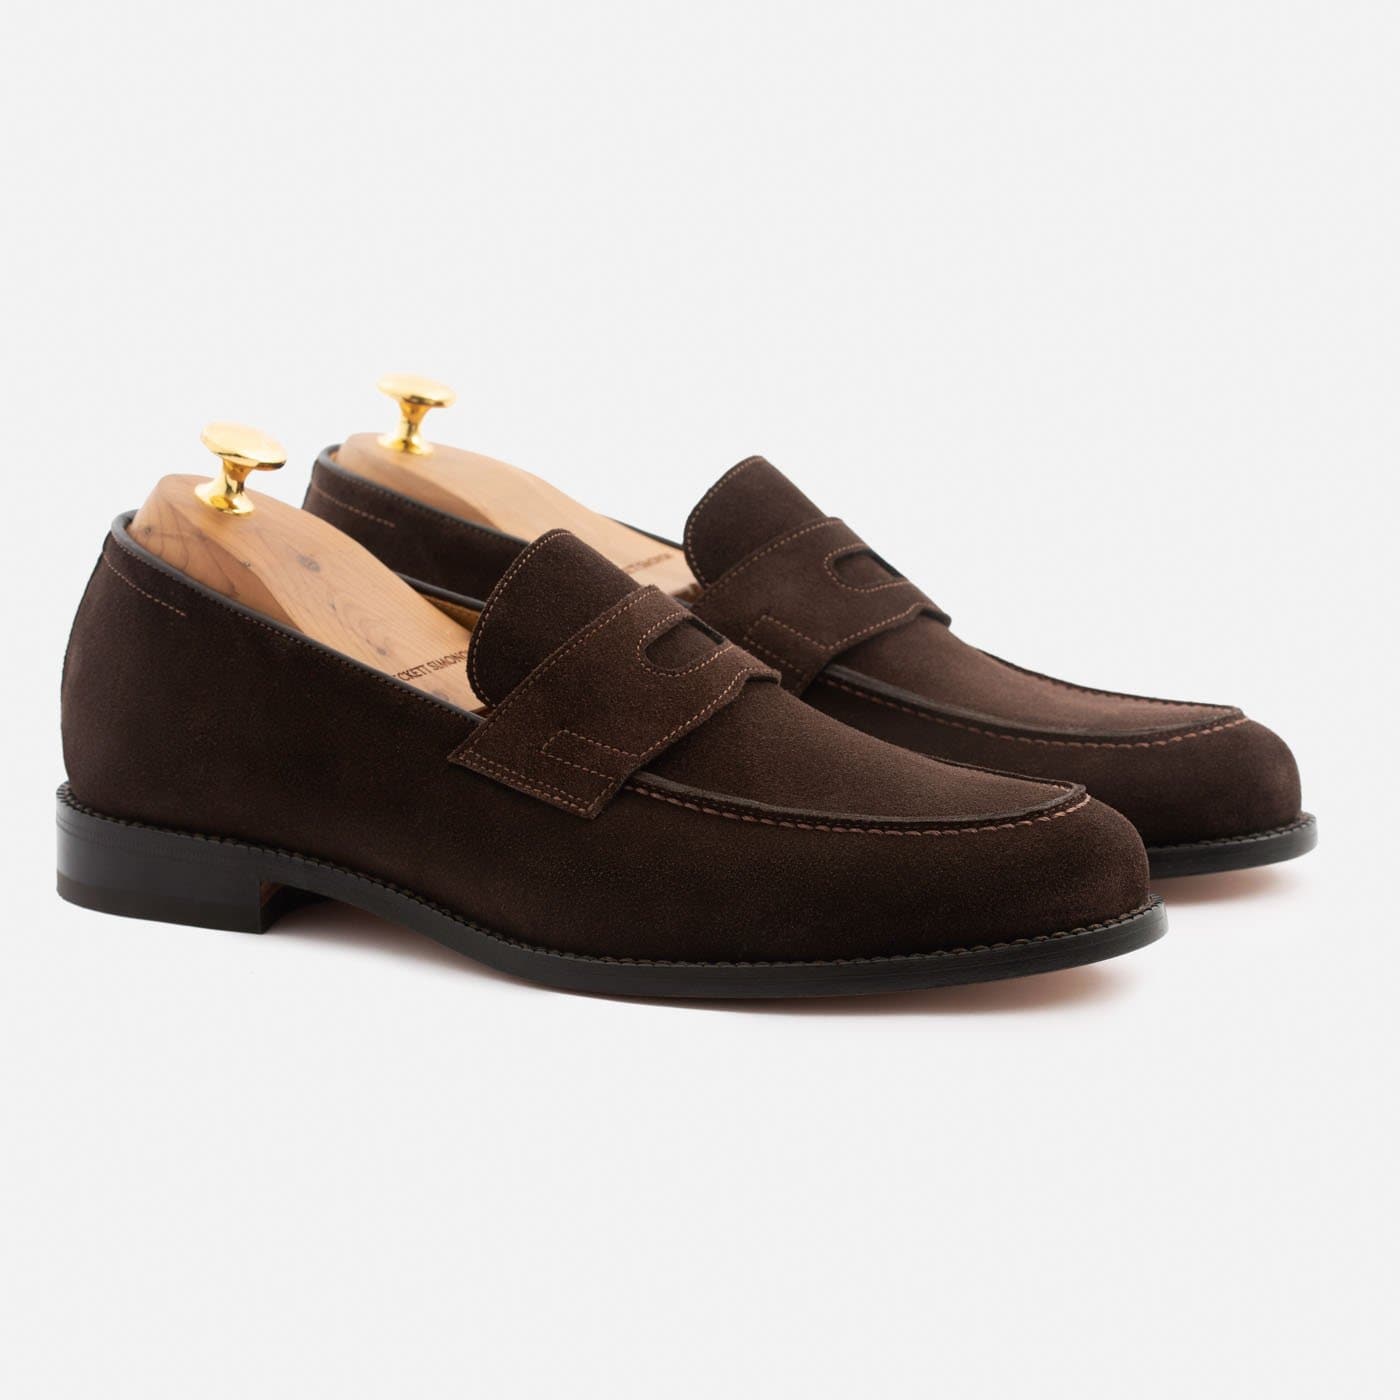 Roy Loafers - Suede - Men's